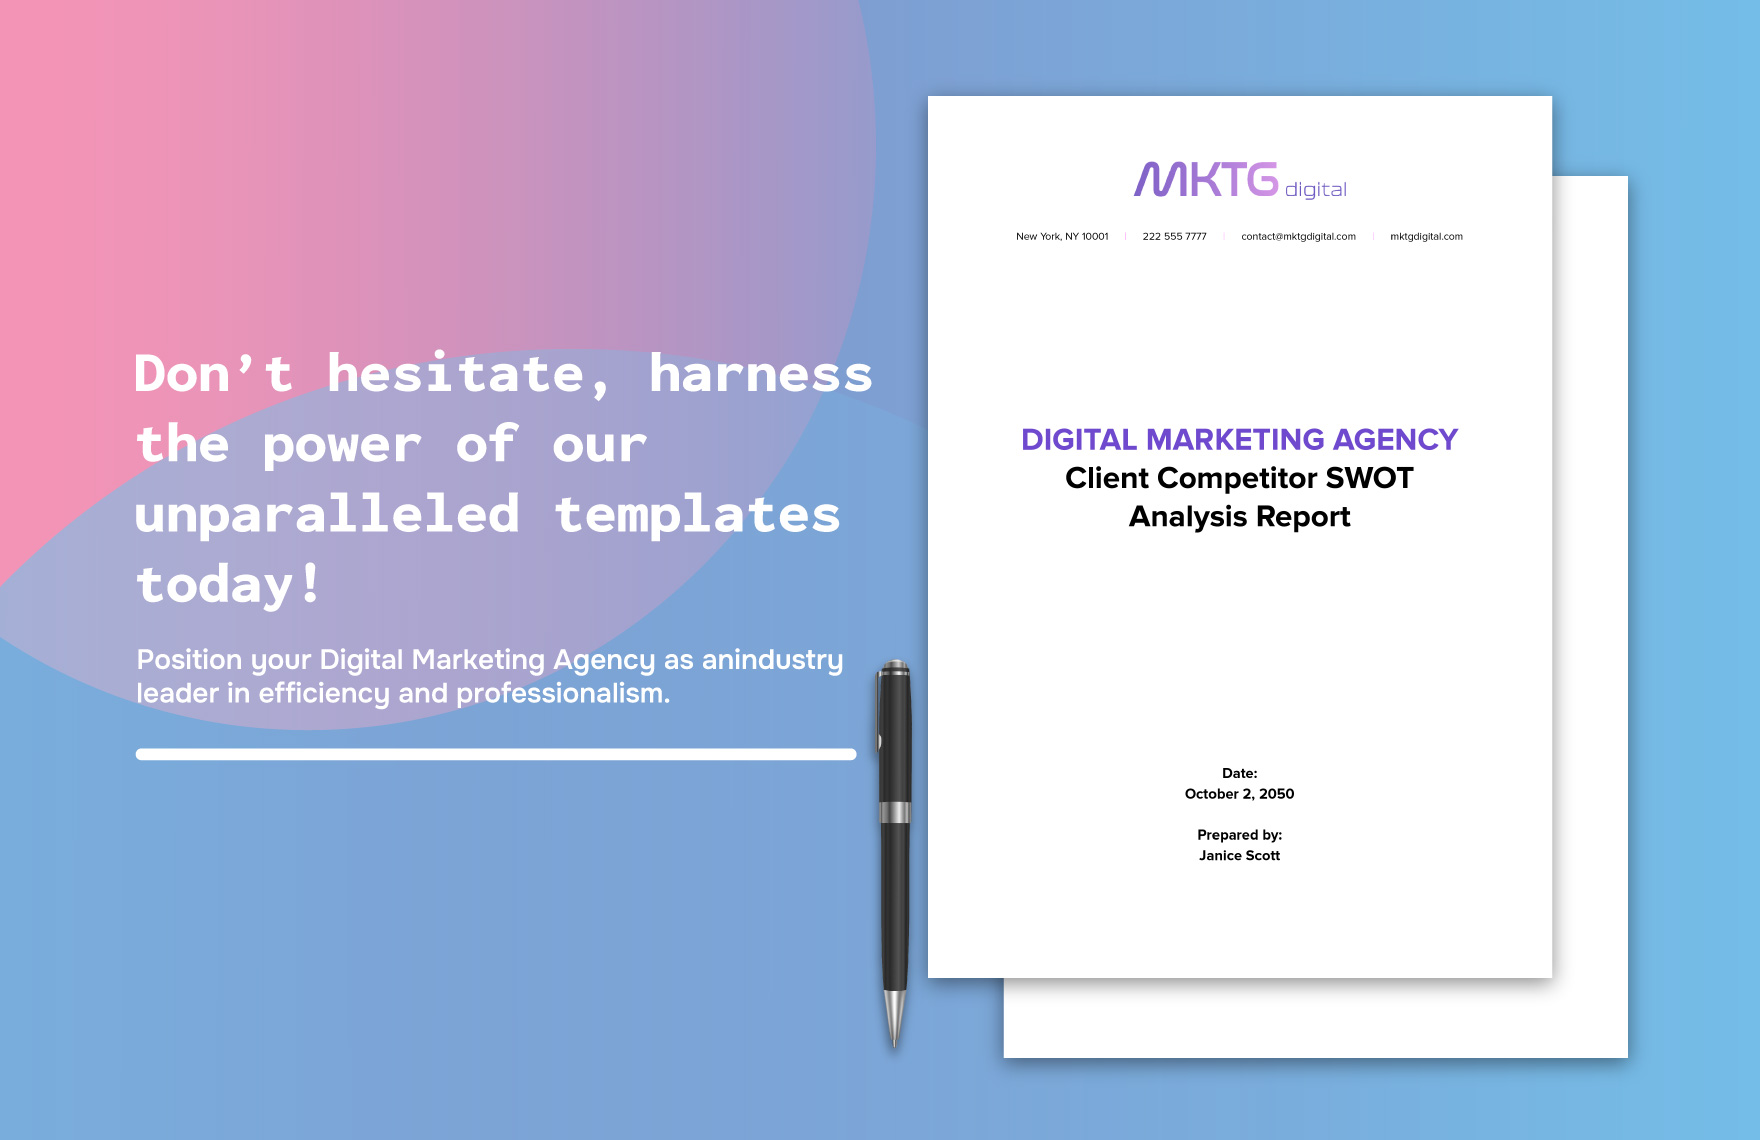 Digital Marketing Agency Client Competitor SWOT Analysis Report Template